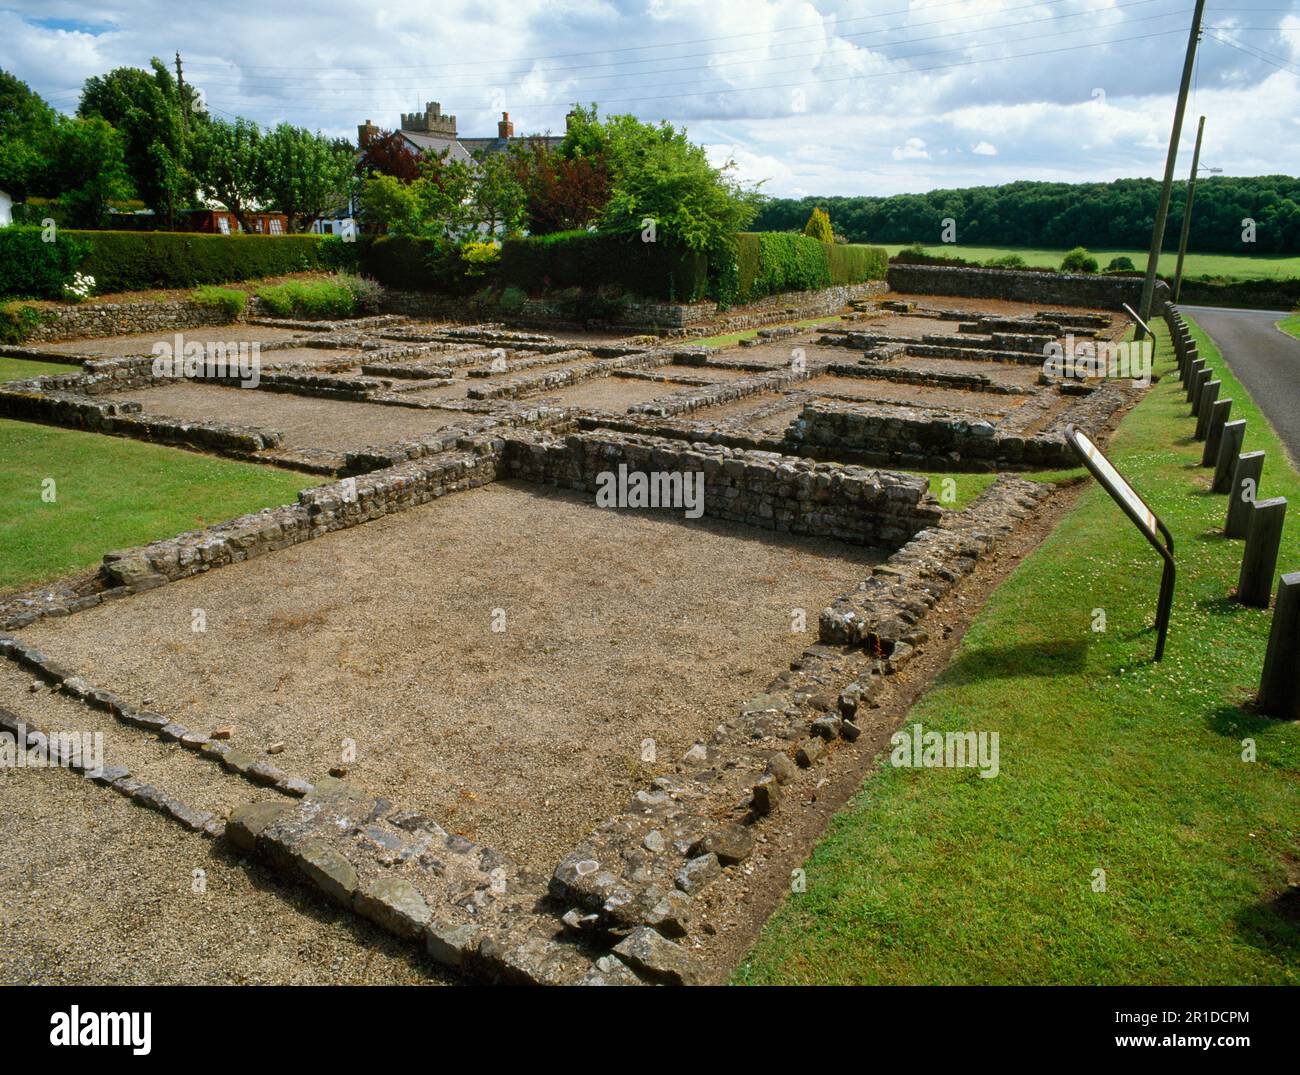 View S of the excavated foundations of several phases (late C1st-C4thAD) of Roman buildings on Pound Lane, Caerwent Roman town (Venta Silurum), Wales. Stock Photo